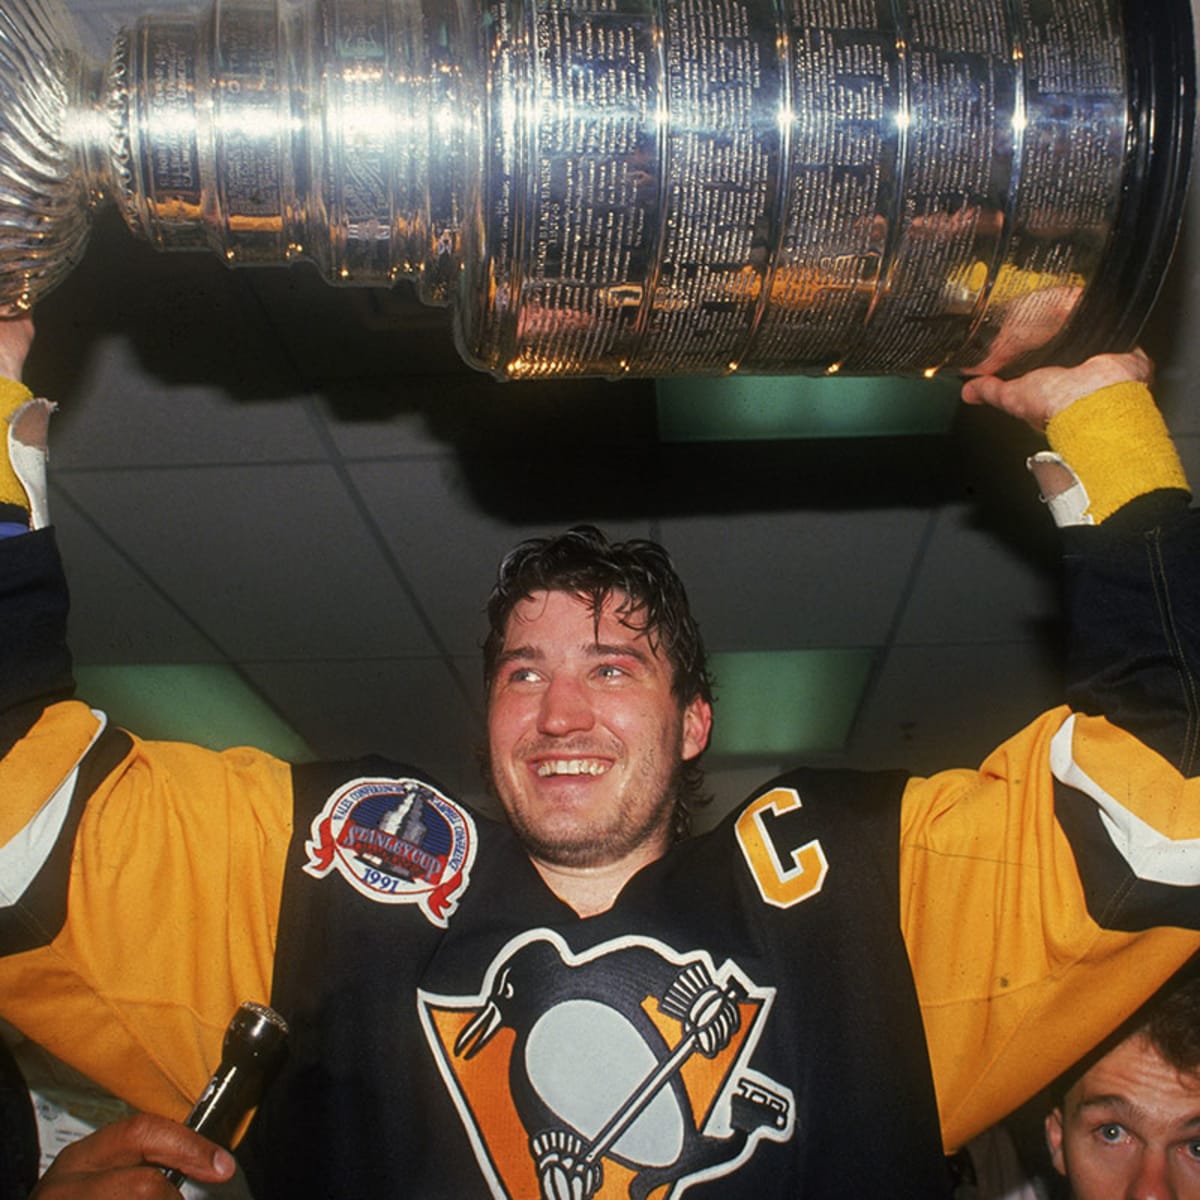 Stanley Cup's traveling tales span the globe, bottom of Lemieux's